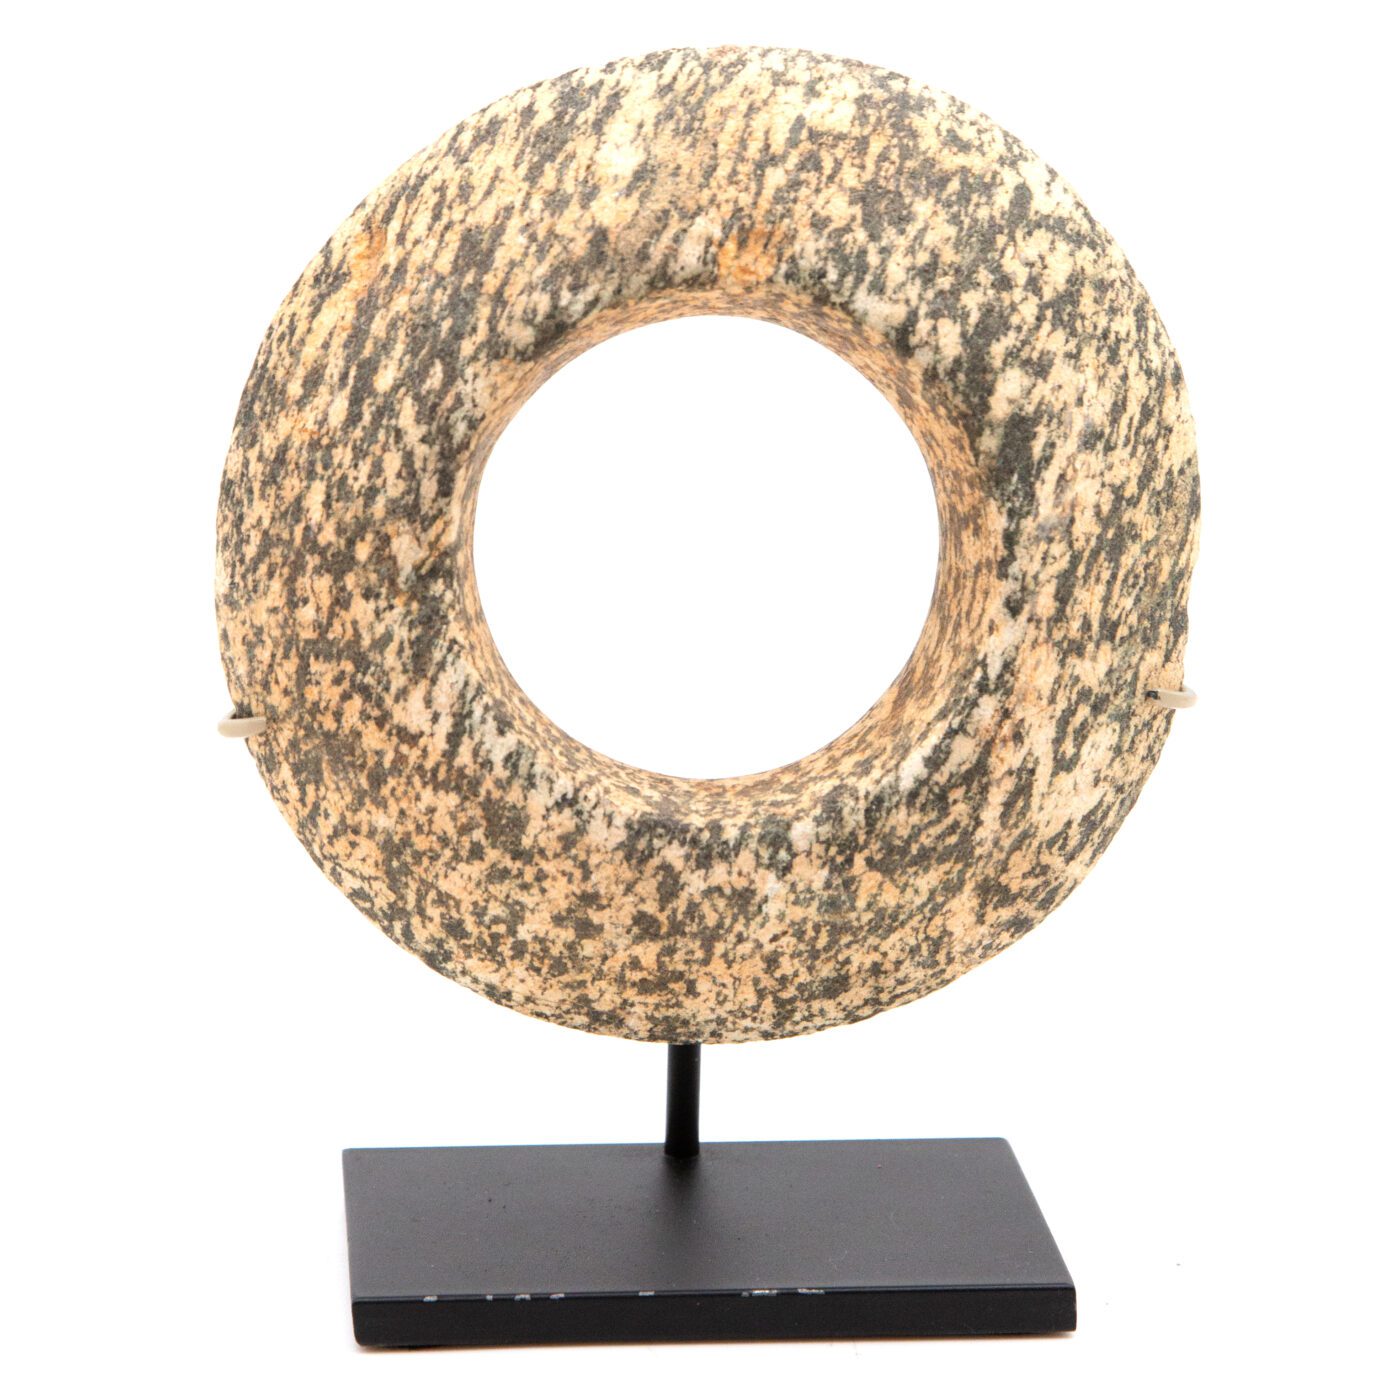 Large African Stone Bracelet mounted on a black metal stand